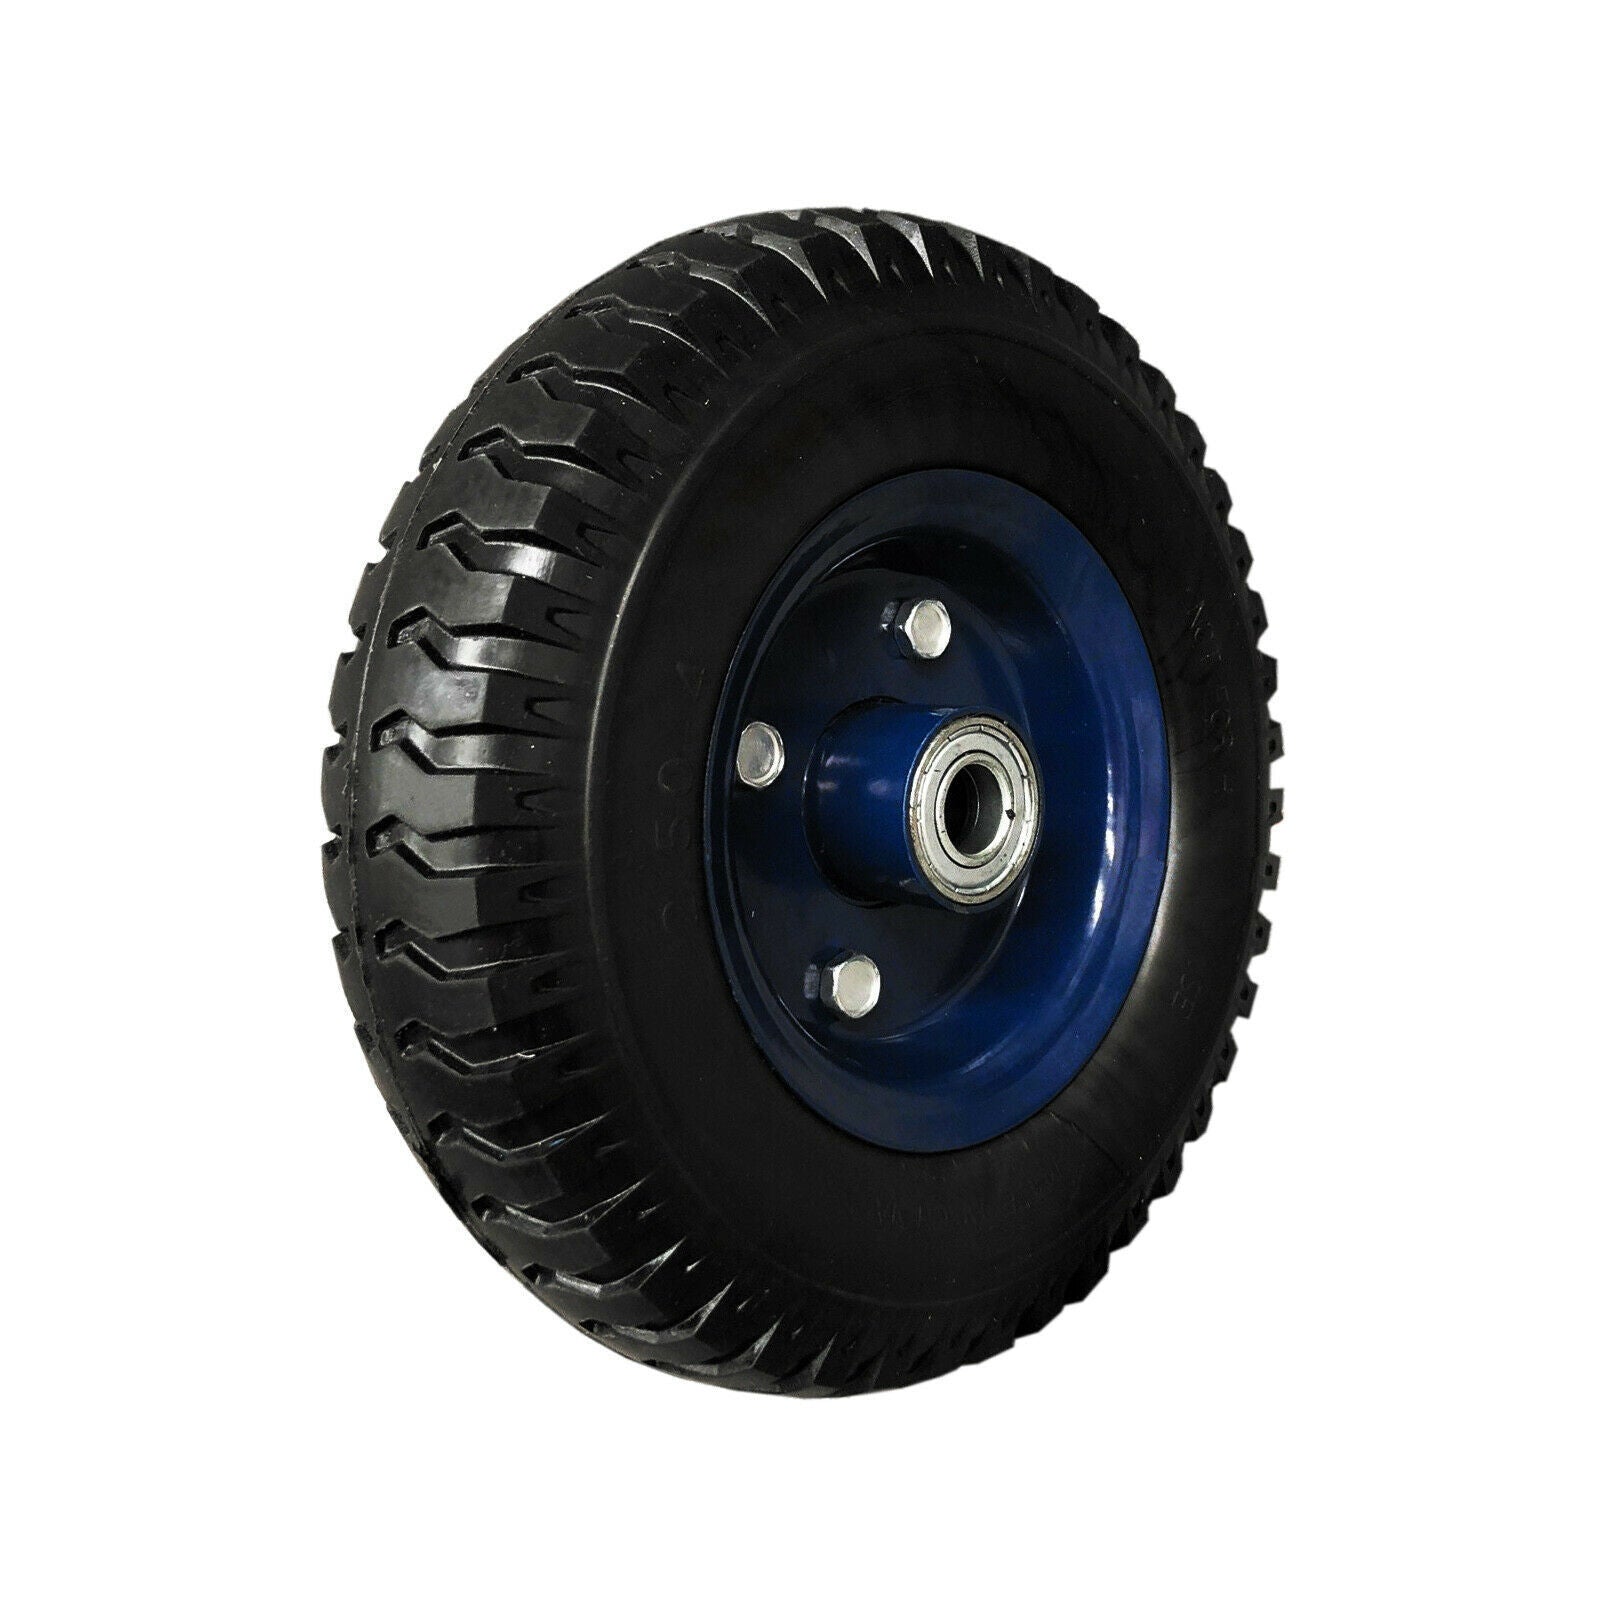 Reliable 8-Inch 2.50-4 Solid Trolley Wheel - Puncture Proof with Double Hub, 16mm Bore, Made from PU Foam